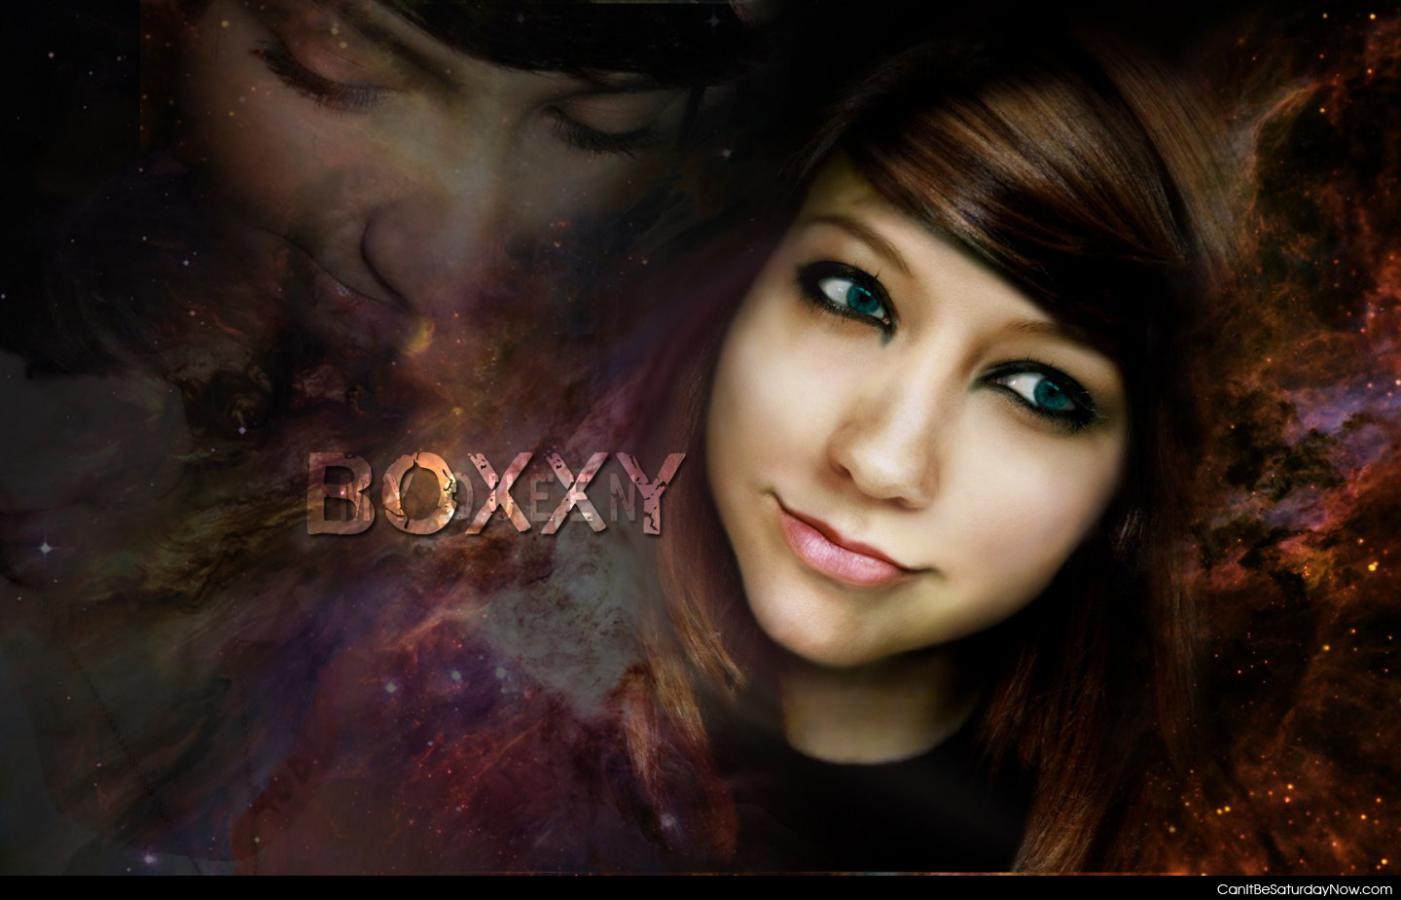 Space boxxy - she is the queen